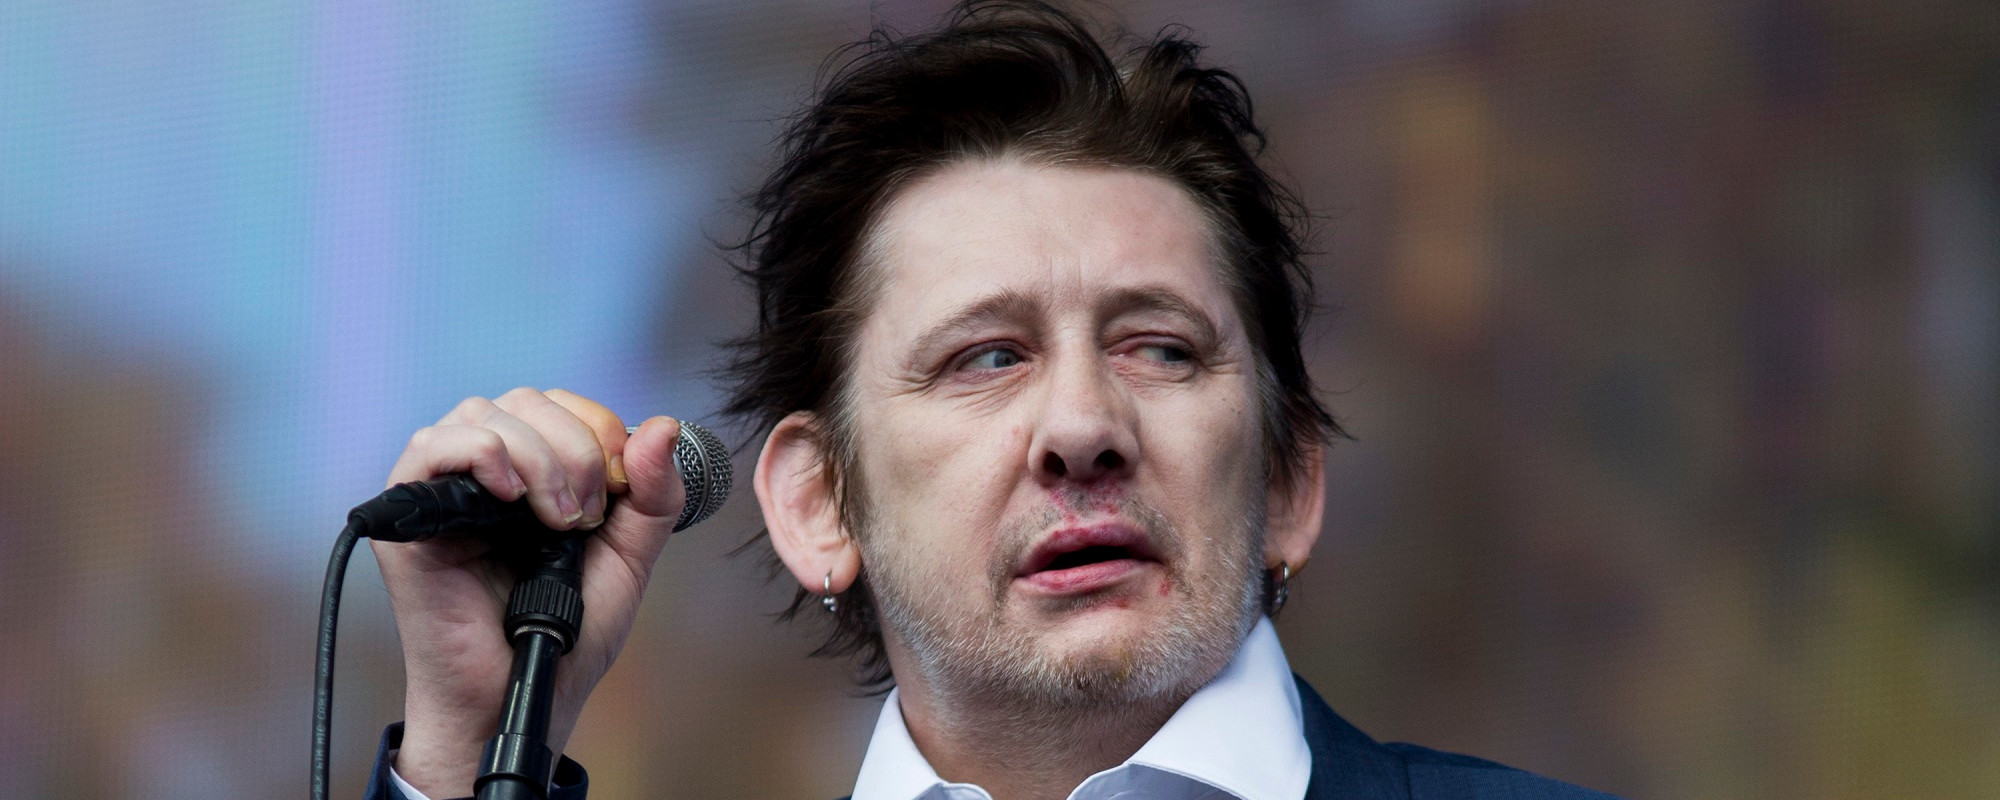 Shane MacGowan’s Funeral: How To Watch the Emotional Send-off of The Pogues Frontman